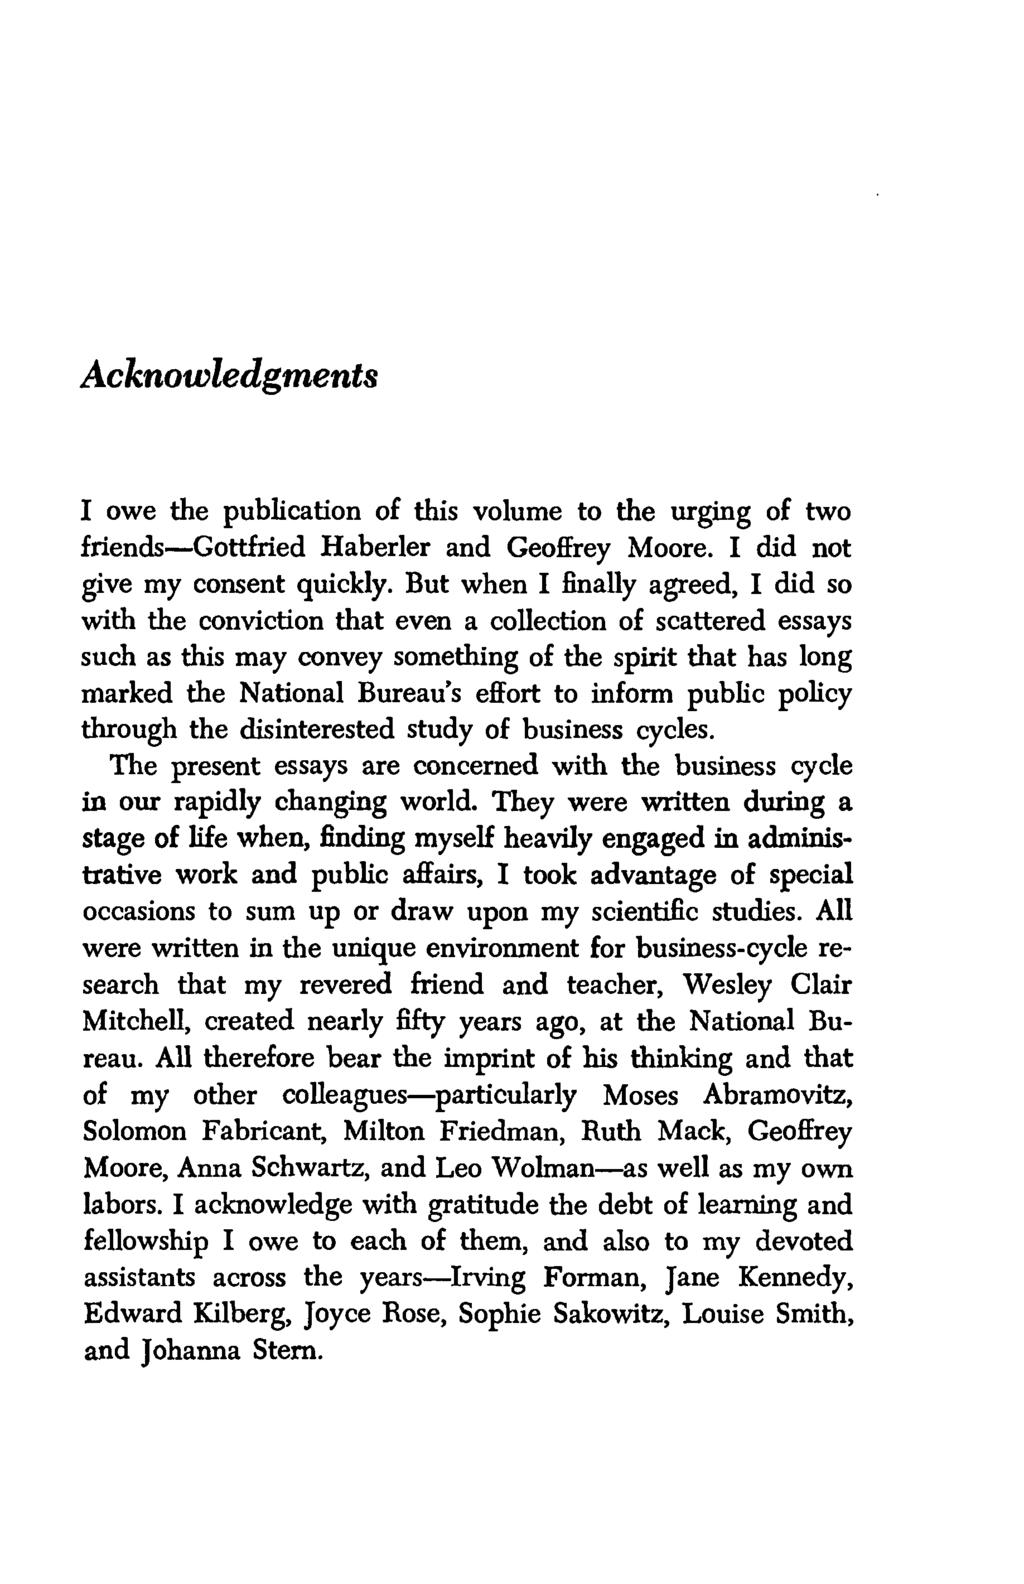 Acknowledgments I owe the publication of this volume to the urging of two friends Gottiried Haberler and Geoffrey Moore. I cud not give my consent quickly.